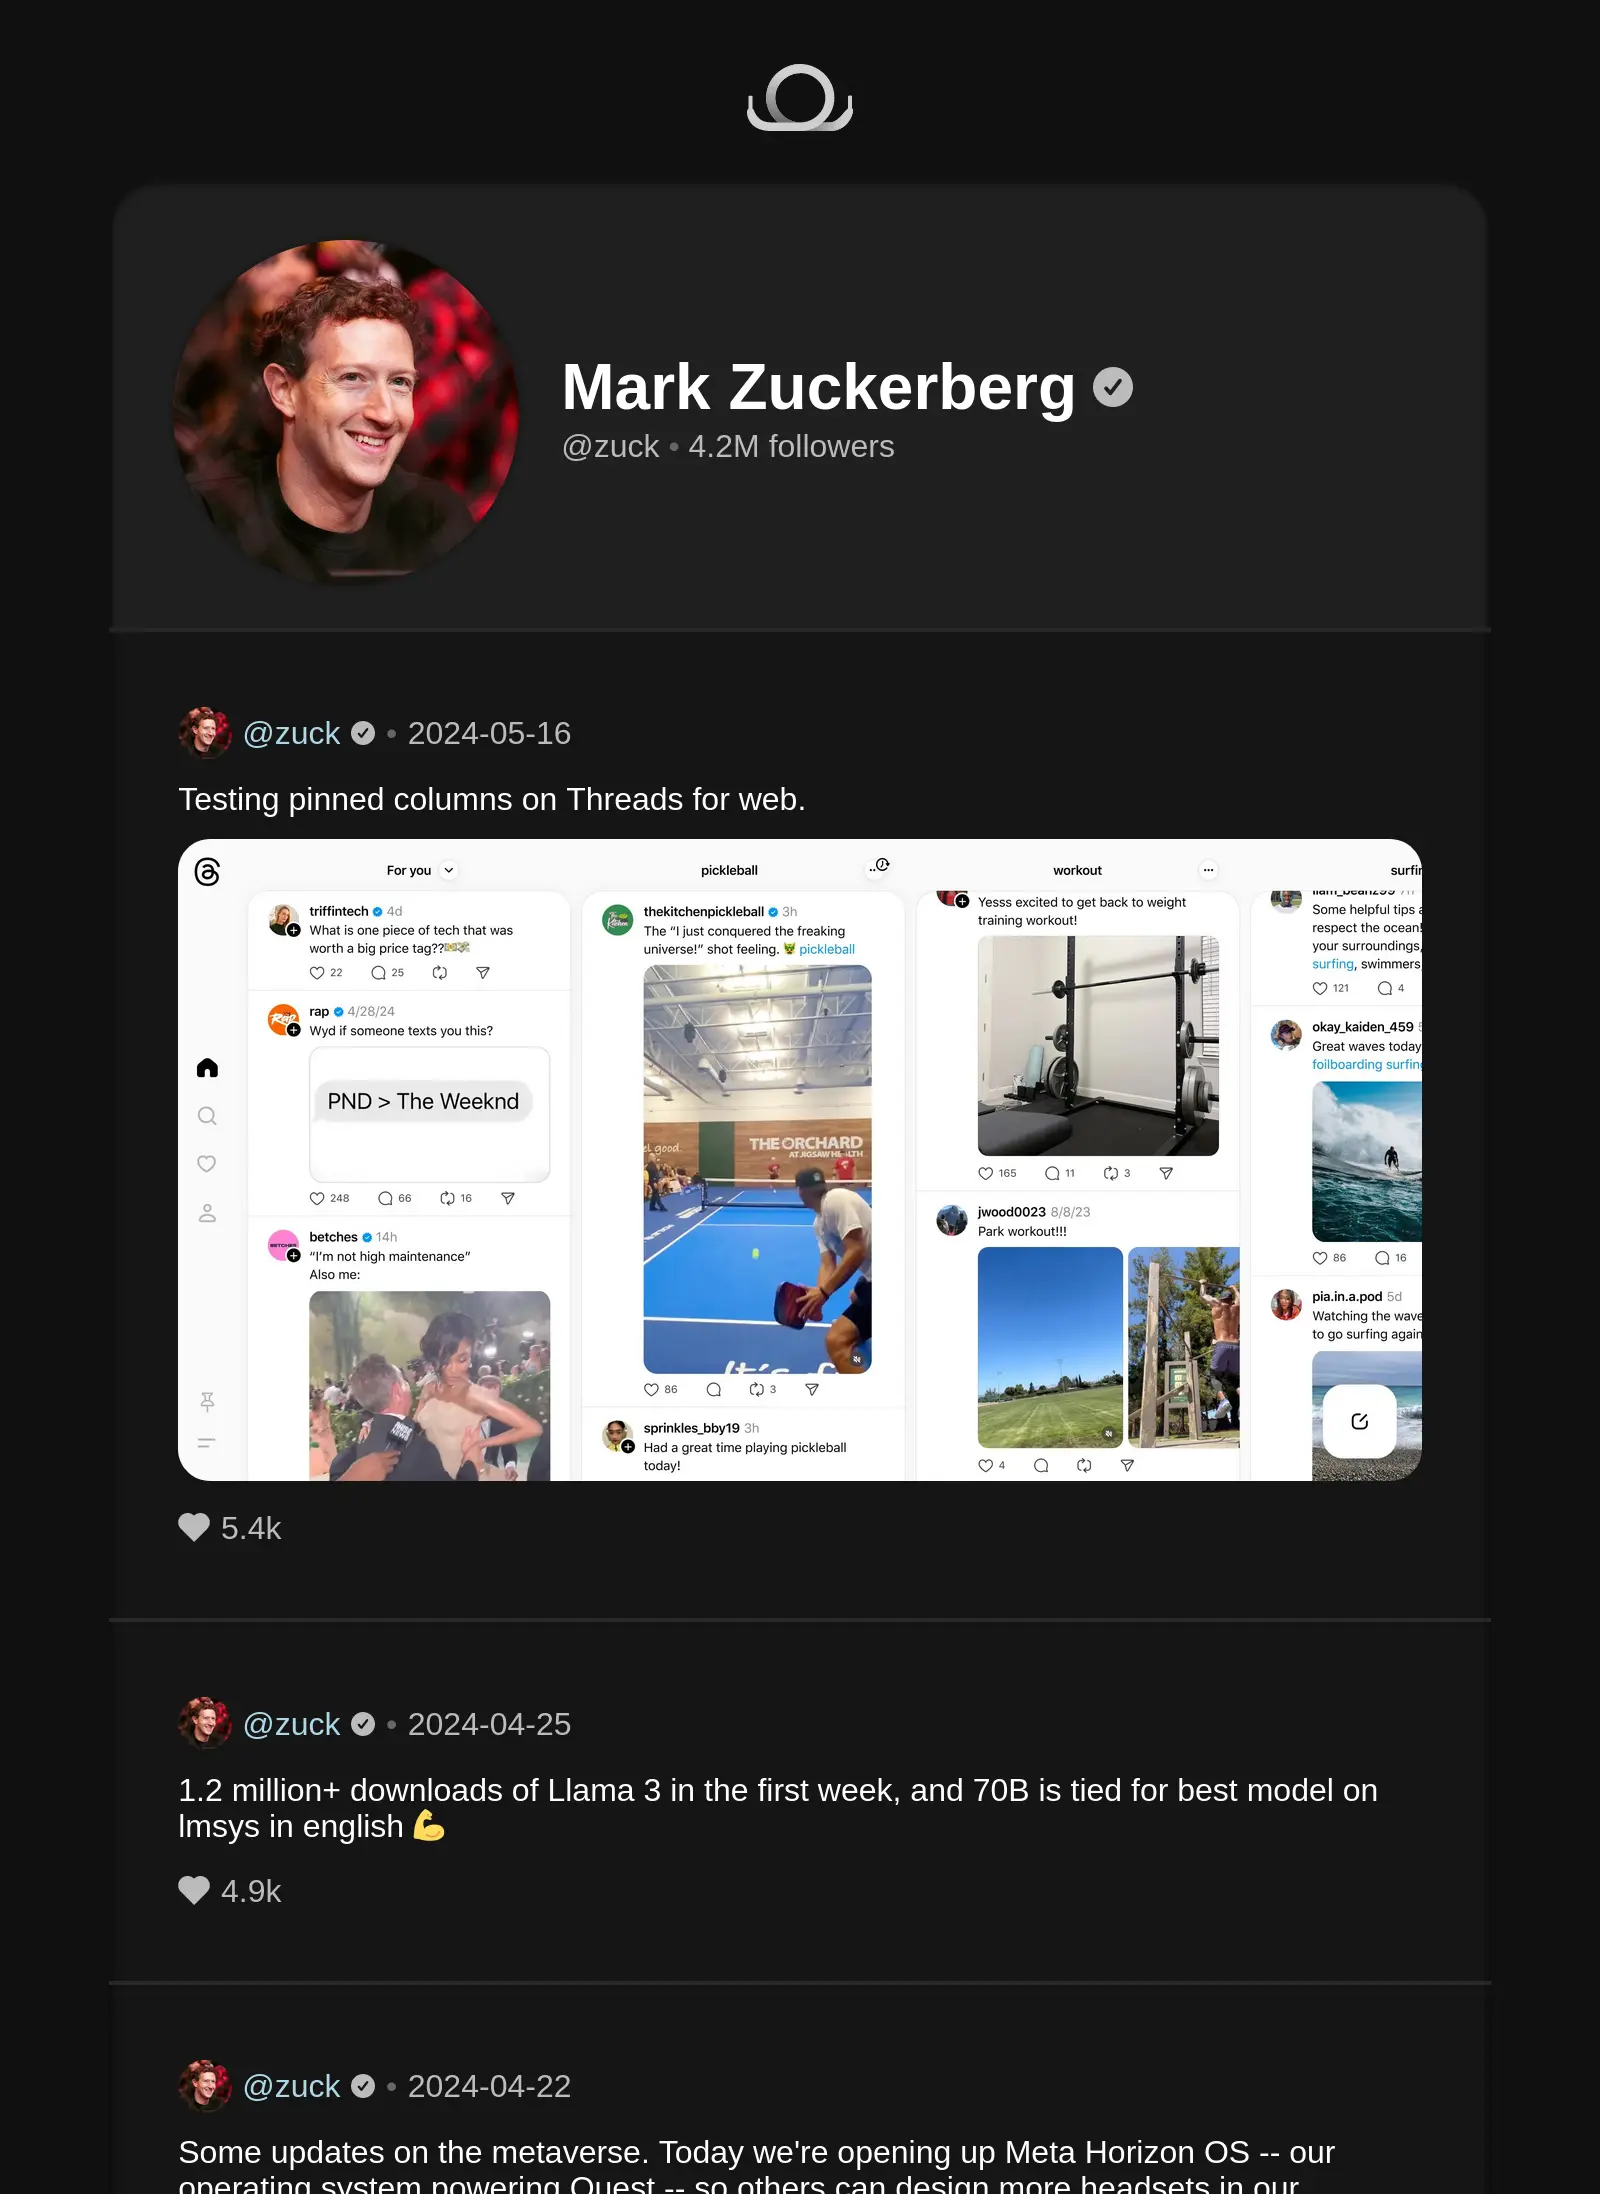 Mark Zuckerberg's profile on Shoelace, showing three posts: One showcasing columns on the official Threads frontend, another congratulating himself for 1.2M+ downloads in his company's new AI software, and the glimpse of a post related to the "metaverse"